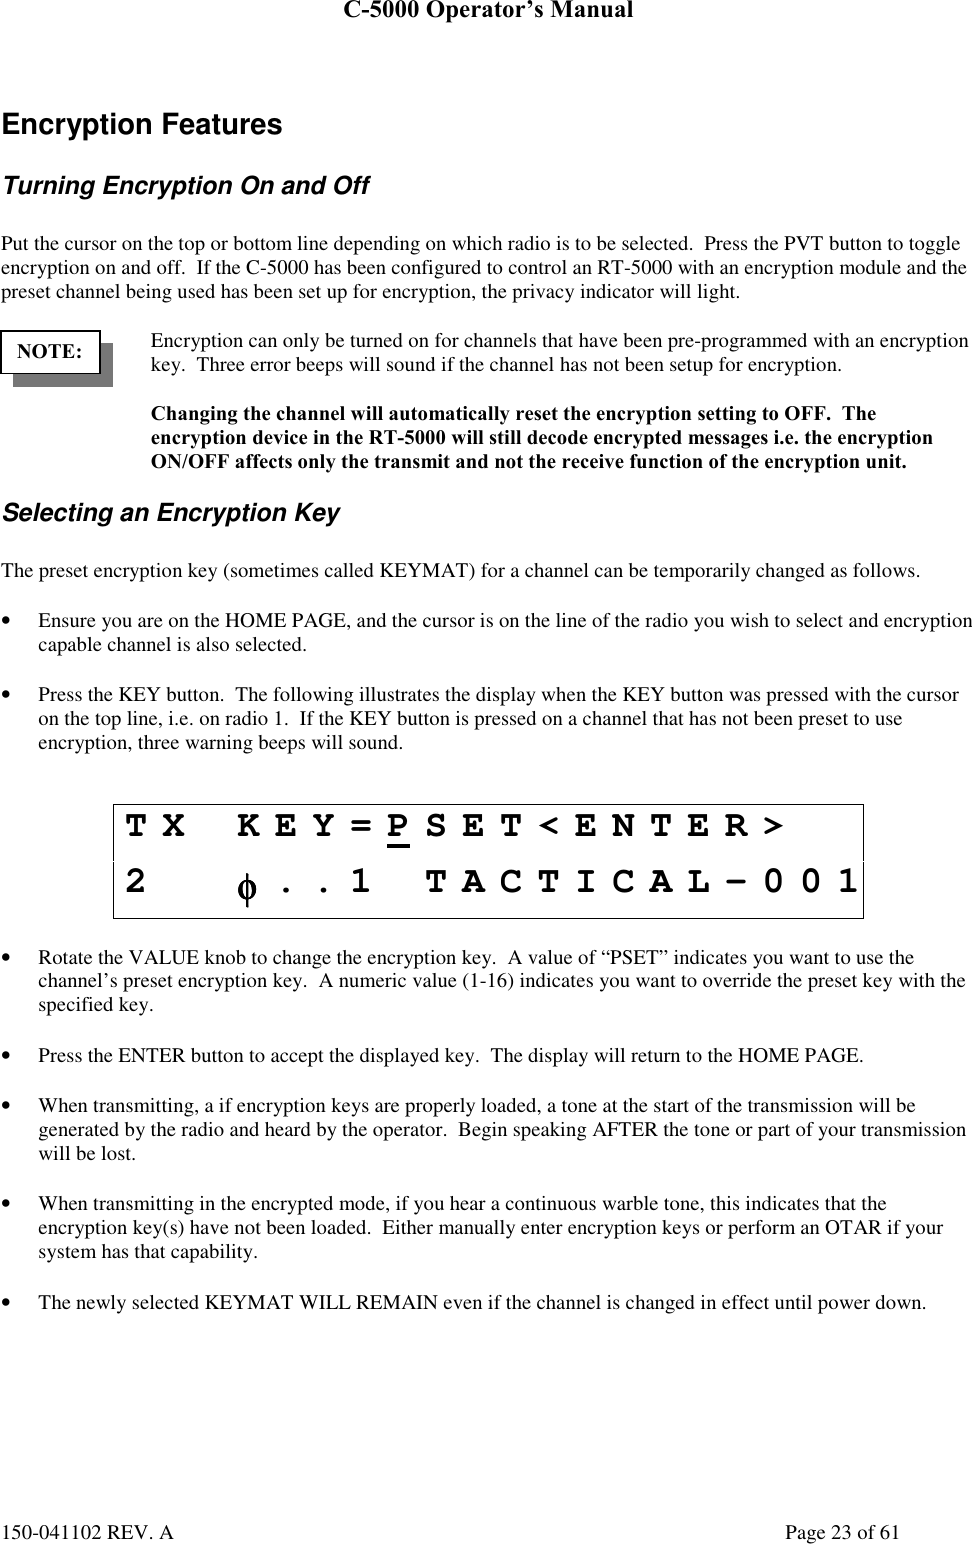 C-5000 Operator’s Manual150-041102 REV. A Page 23 of 61Encryption FeaturesTurning Encryption On and OffPut the cursor on the top or bottom line depending on which radio is to be selected.  Press the PVT button to toggleencryption on and off.  If the C-5000 has been configured to control an RT-5000 with an encryption module and thepreset channel being used has been set up for encryption, the privacy indicator will light.Encryption can only be turned on for channels that have been pre-programmed with an encryptionkey.  Three error beeps will sound if the channel has not been setup for encryption.Changing the channel will automatically reset the encryption setting to OFF.  Theencryption device in the RT-5000 will still decode encrypted messages i.e. the encryptionON/OFF affects only the transmit and not the receive function of the encryption unit.Selecting an Encryption KeyThe preset encryption key (sometimes called KEYMAT) for a channel can be temporarily changed as follows.• Ensure you are on the HOME PAGE, and the cursor is on the line of the radio you wish to select and encryptioncapable channel is also selected.• Press the KEY button.  The following illustrates the display when the KEY button was pressed with the cursoron the top line, i.e. on radio 1.  If the KEY button is pressed on a channel that has not been preset to useencryption, three warning beeps will sound.TX KEY=PSET&lt;ENTER&gt;2φφφφ..1 TACTICAL-001• Rotate the VALUE knob to change the encryption key.  A value of “PSET” indicates you want to use thechannel’s preset encryption key.  A numeric value (1-16) indicates you want to override the preset key with thespecified key.• Press the ENTER button to accept the displayed key.  The display will return to the HOME PAGE.• When transmitting, a if encryption keys are properly loaded, a tone at the start of the transmission will begenerated by the radio and heard by the operator.  Begin speaking AFTER the tone or part of your transmissionwill be lost.• When transmitting in the encrypted mode, if you hear a continuous warble tone, this indicates that theencryption key(s) have not been loaded.  Either manually enter encryption keys or perform an OTAR if yoursystem has that capability.• The newly selected KEYMAT WILL REMAIN even if the channel is changed in effect until power down.NOTE: